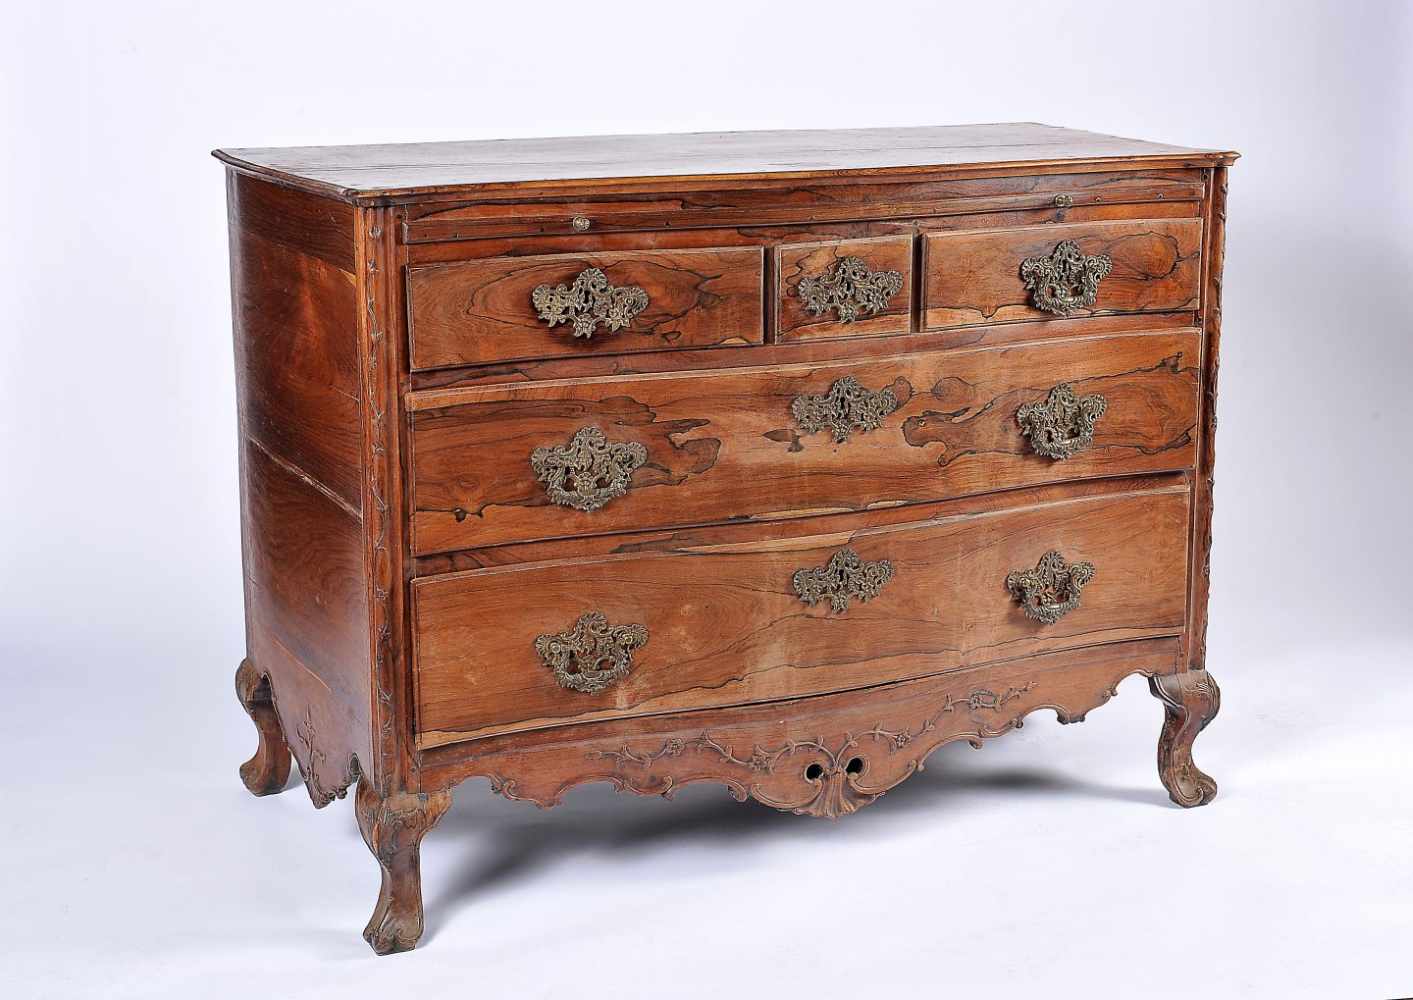 A Chest of Drawers with Pull-out TopA Chest of Drawers with Pull-out Top, D. José I, King of